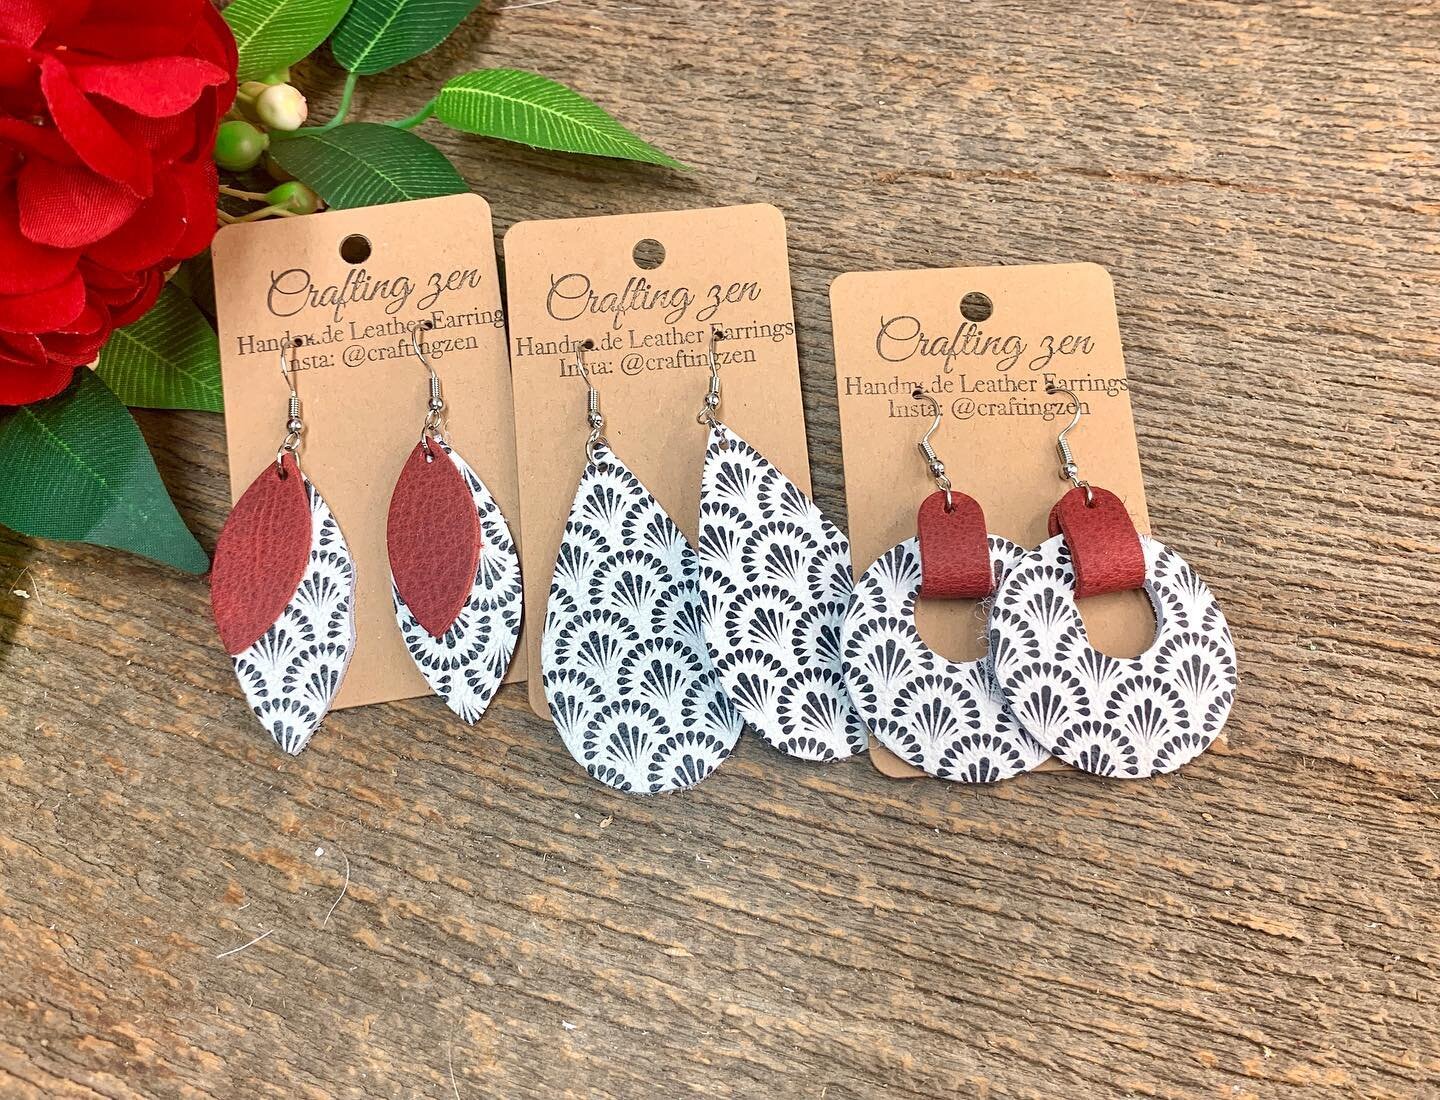 Which do you prefer? Plain BnW or accented with red? 
New leather! BnW peacock patterned accented with red. 

www.craftingzenleather.com

#craftingzenleather #earrings #armstrongjewelrystudio #leatherjewelry #leatherbracelet #shoplocal #leatherearrin